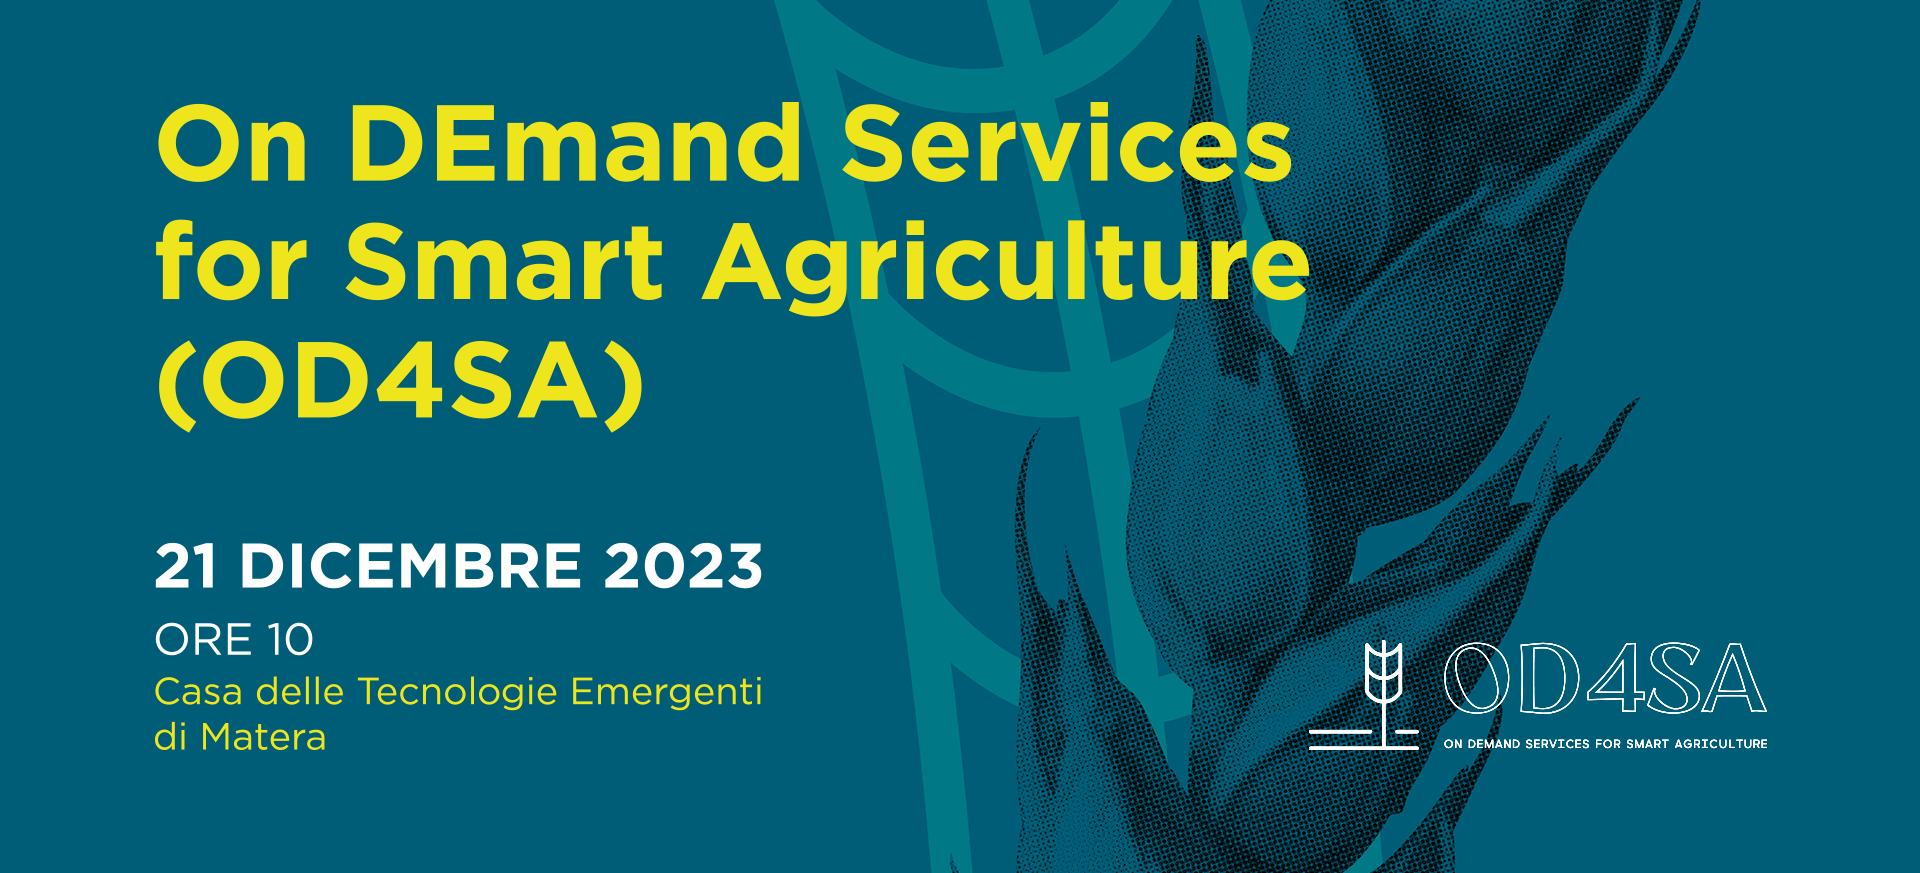 On DEmand Services for Smart Agriculture (OD4SA) - Matera, 21 Dicembre 2023